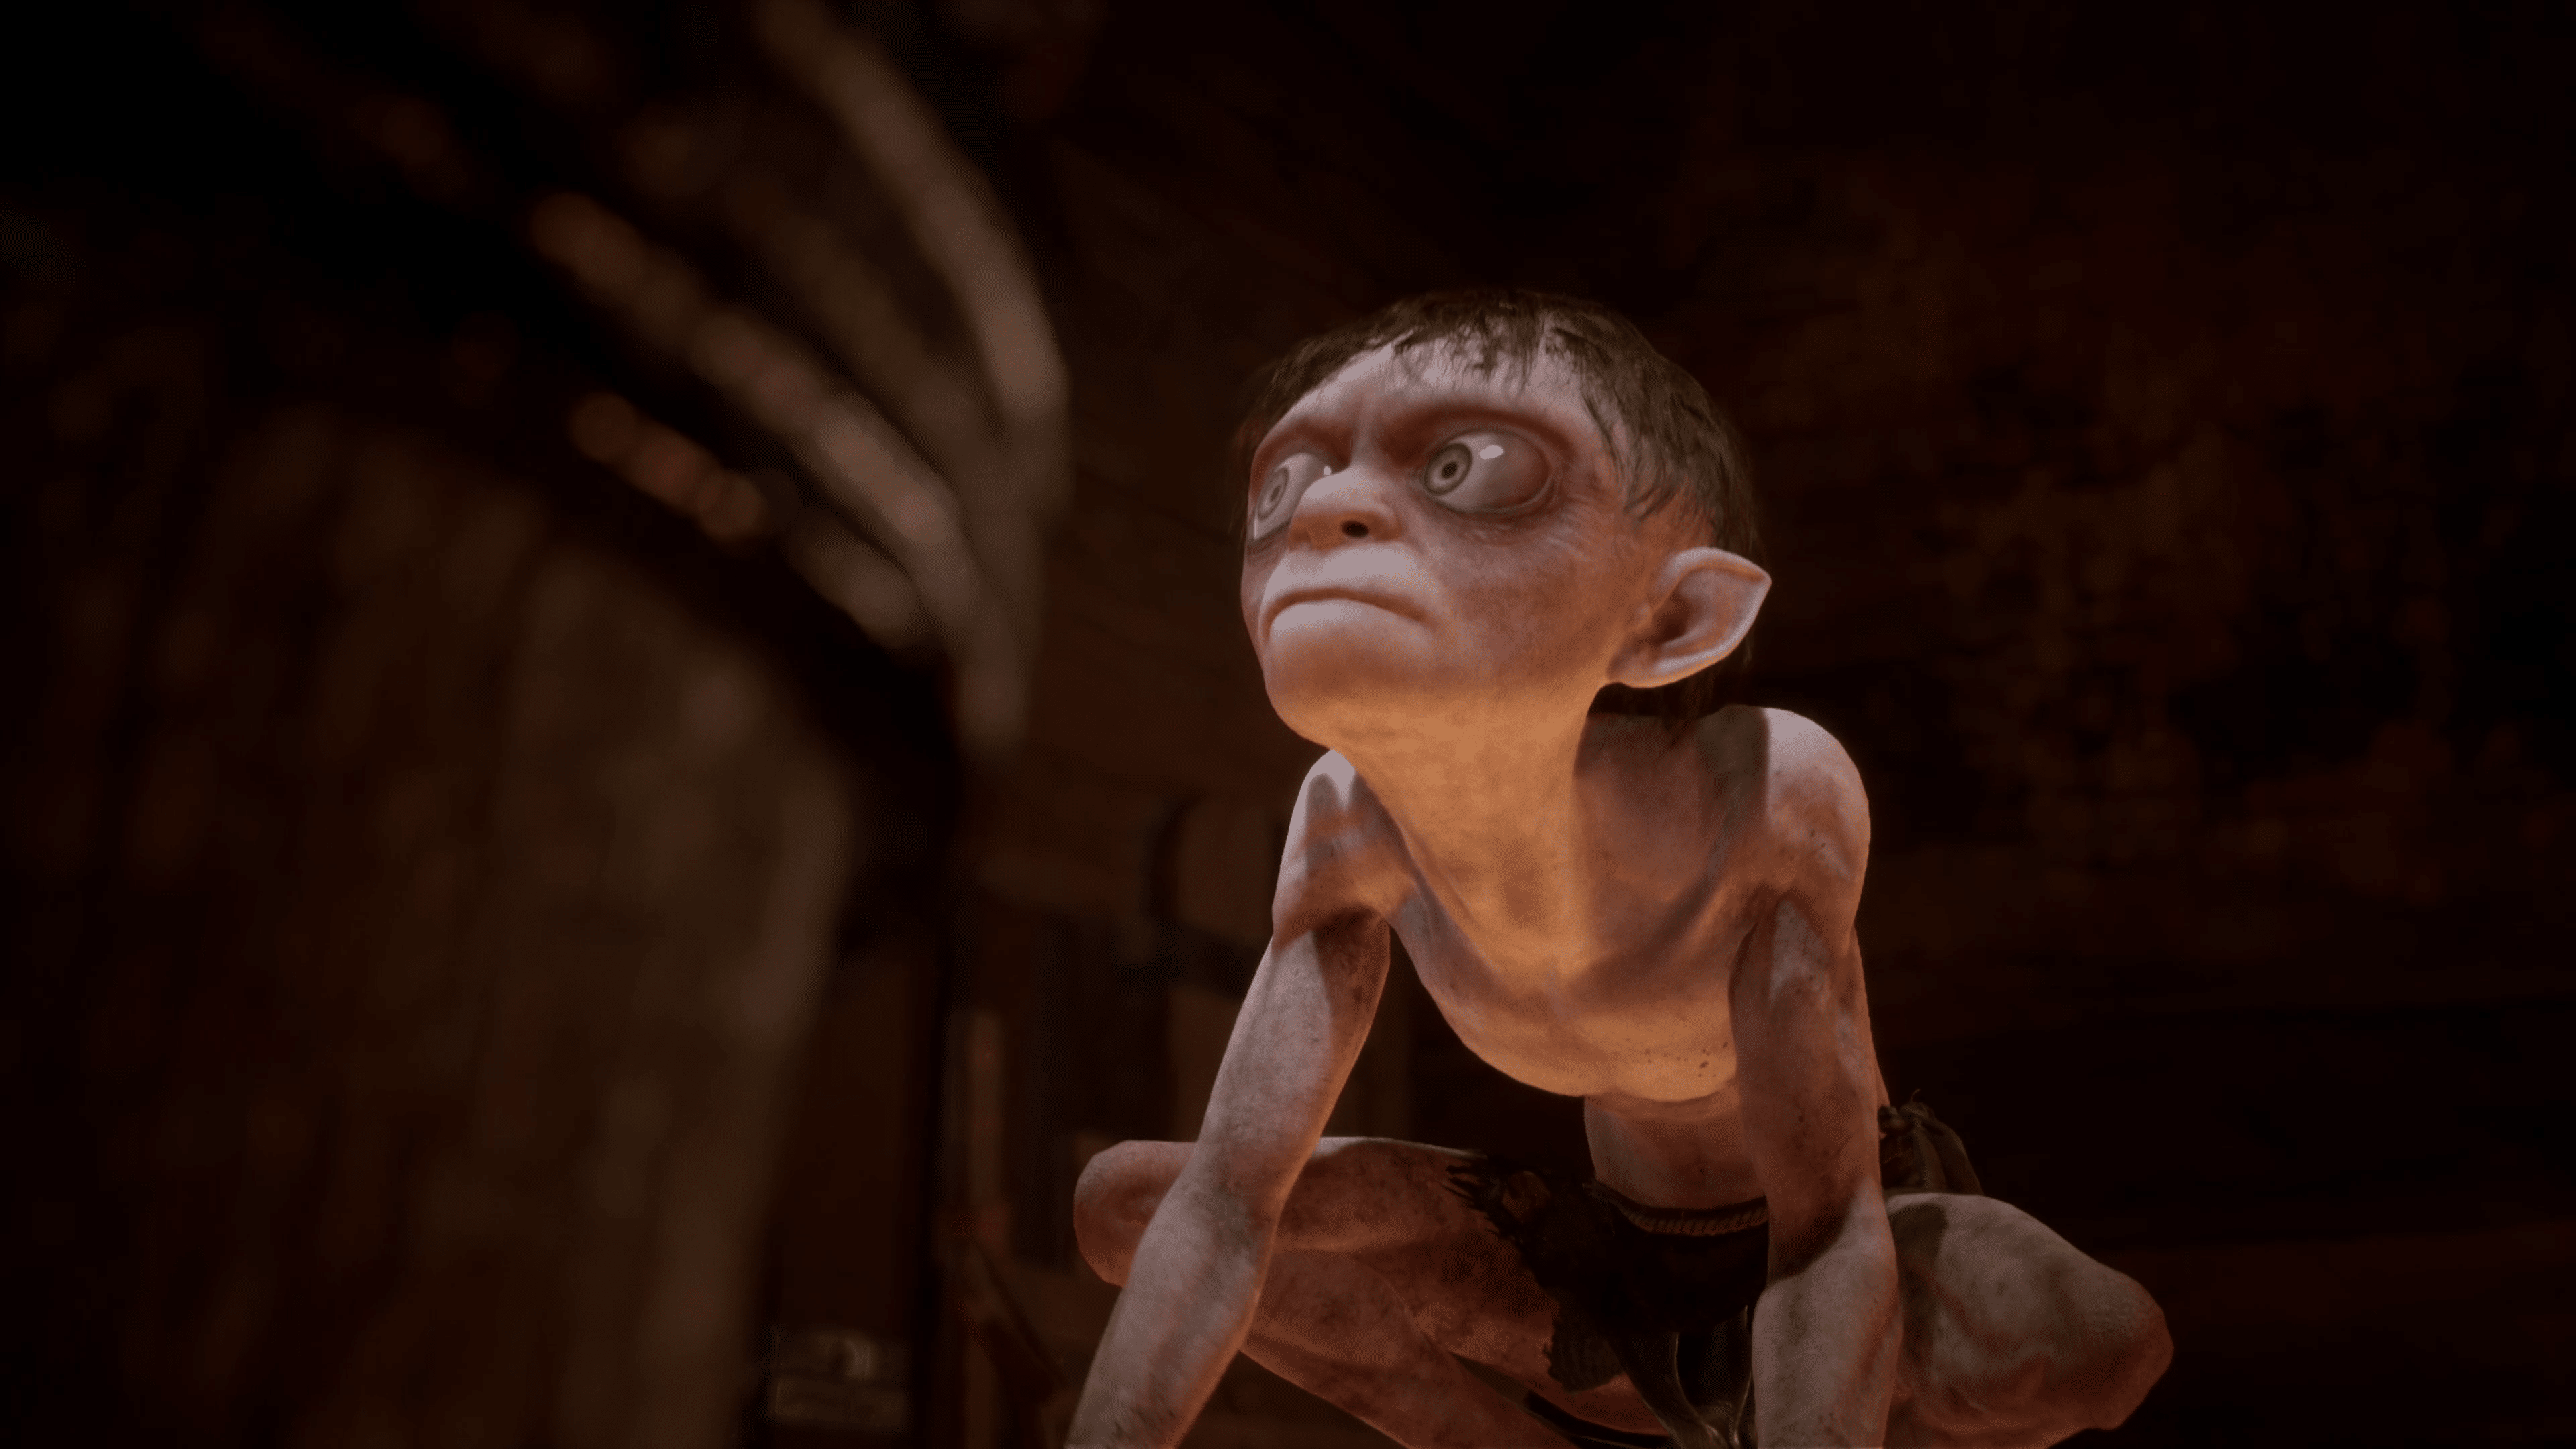 The Lord of the Rings: Gollum Review Scores 